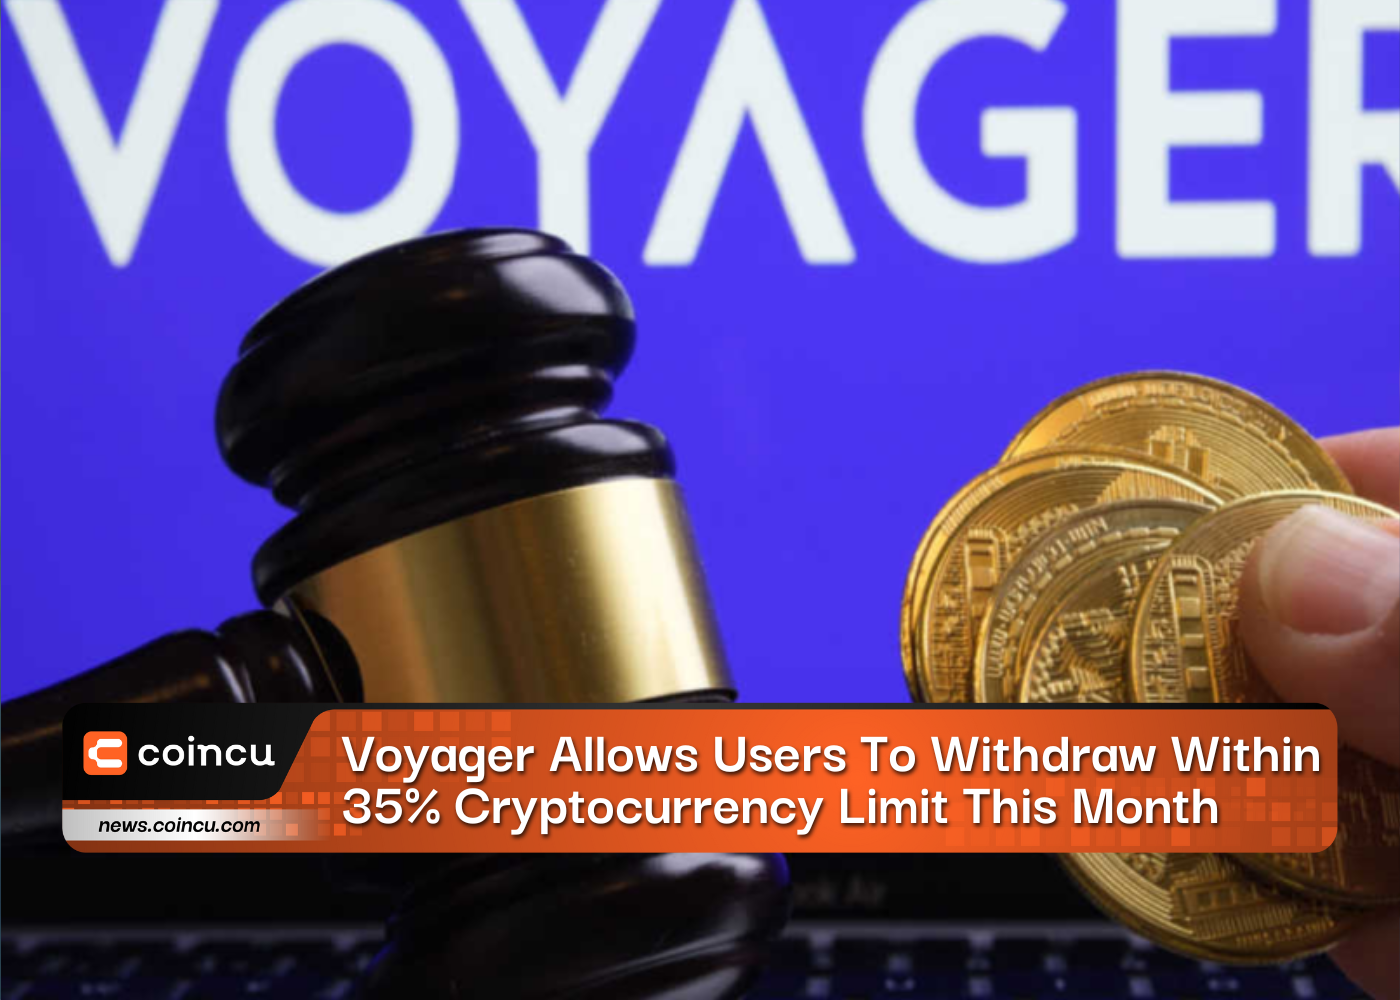 Voyager Allows Users To Withdraw Within 35% Cryptocurrency Limit This Month